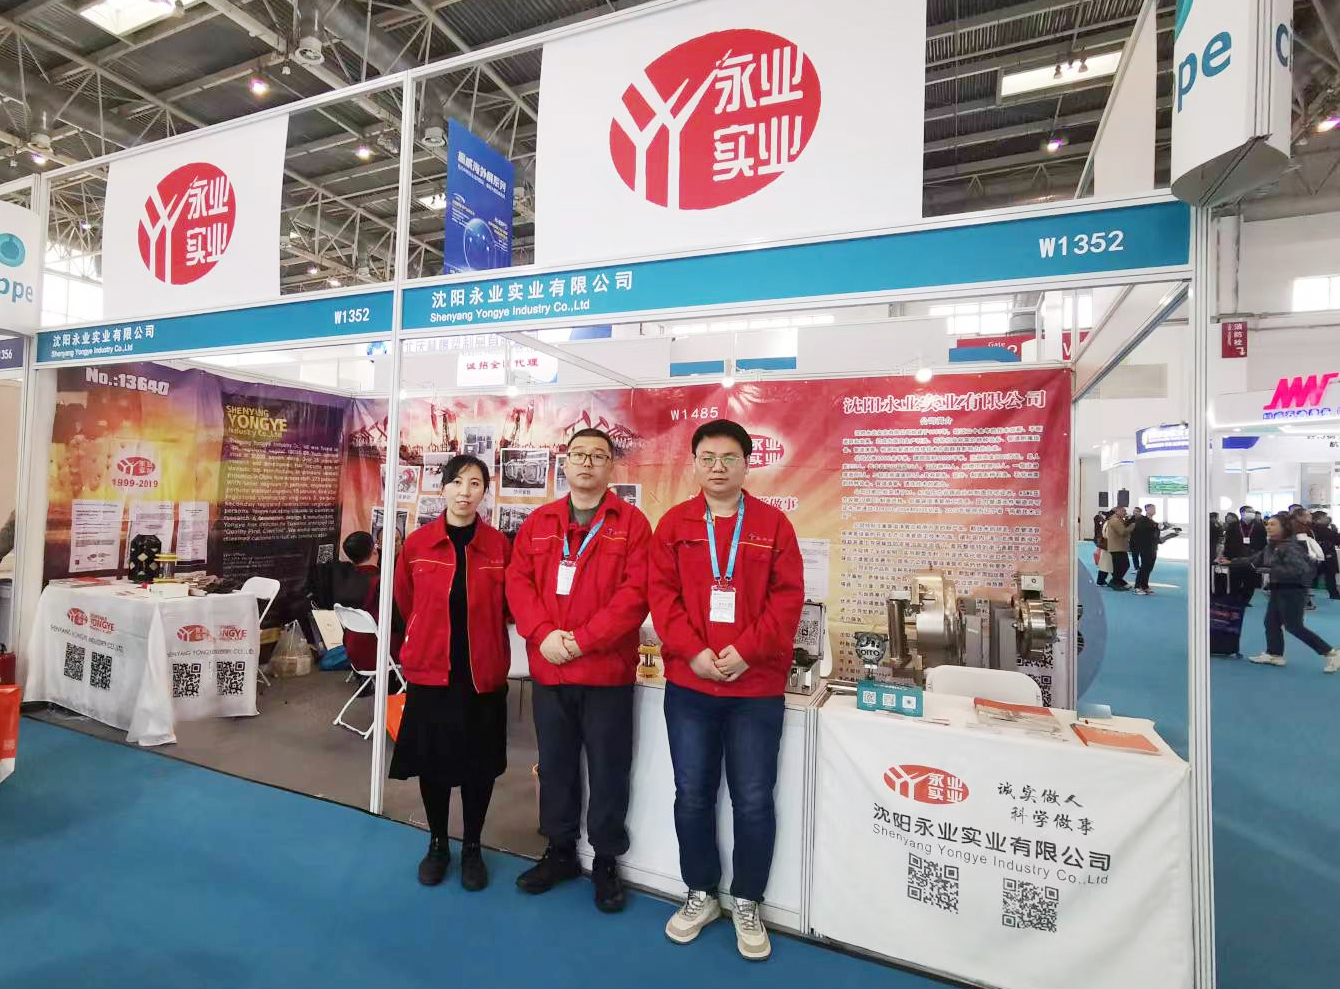 Shenyang Yongye Industrial Co., Ltd. participated in the 24th China International Petroleum and Petrochemical Equipment Exhibition